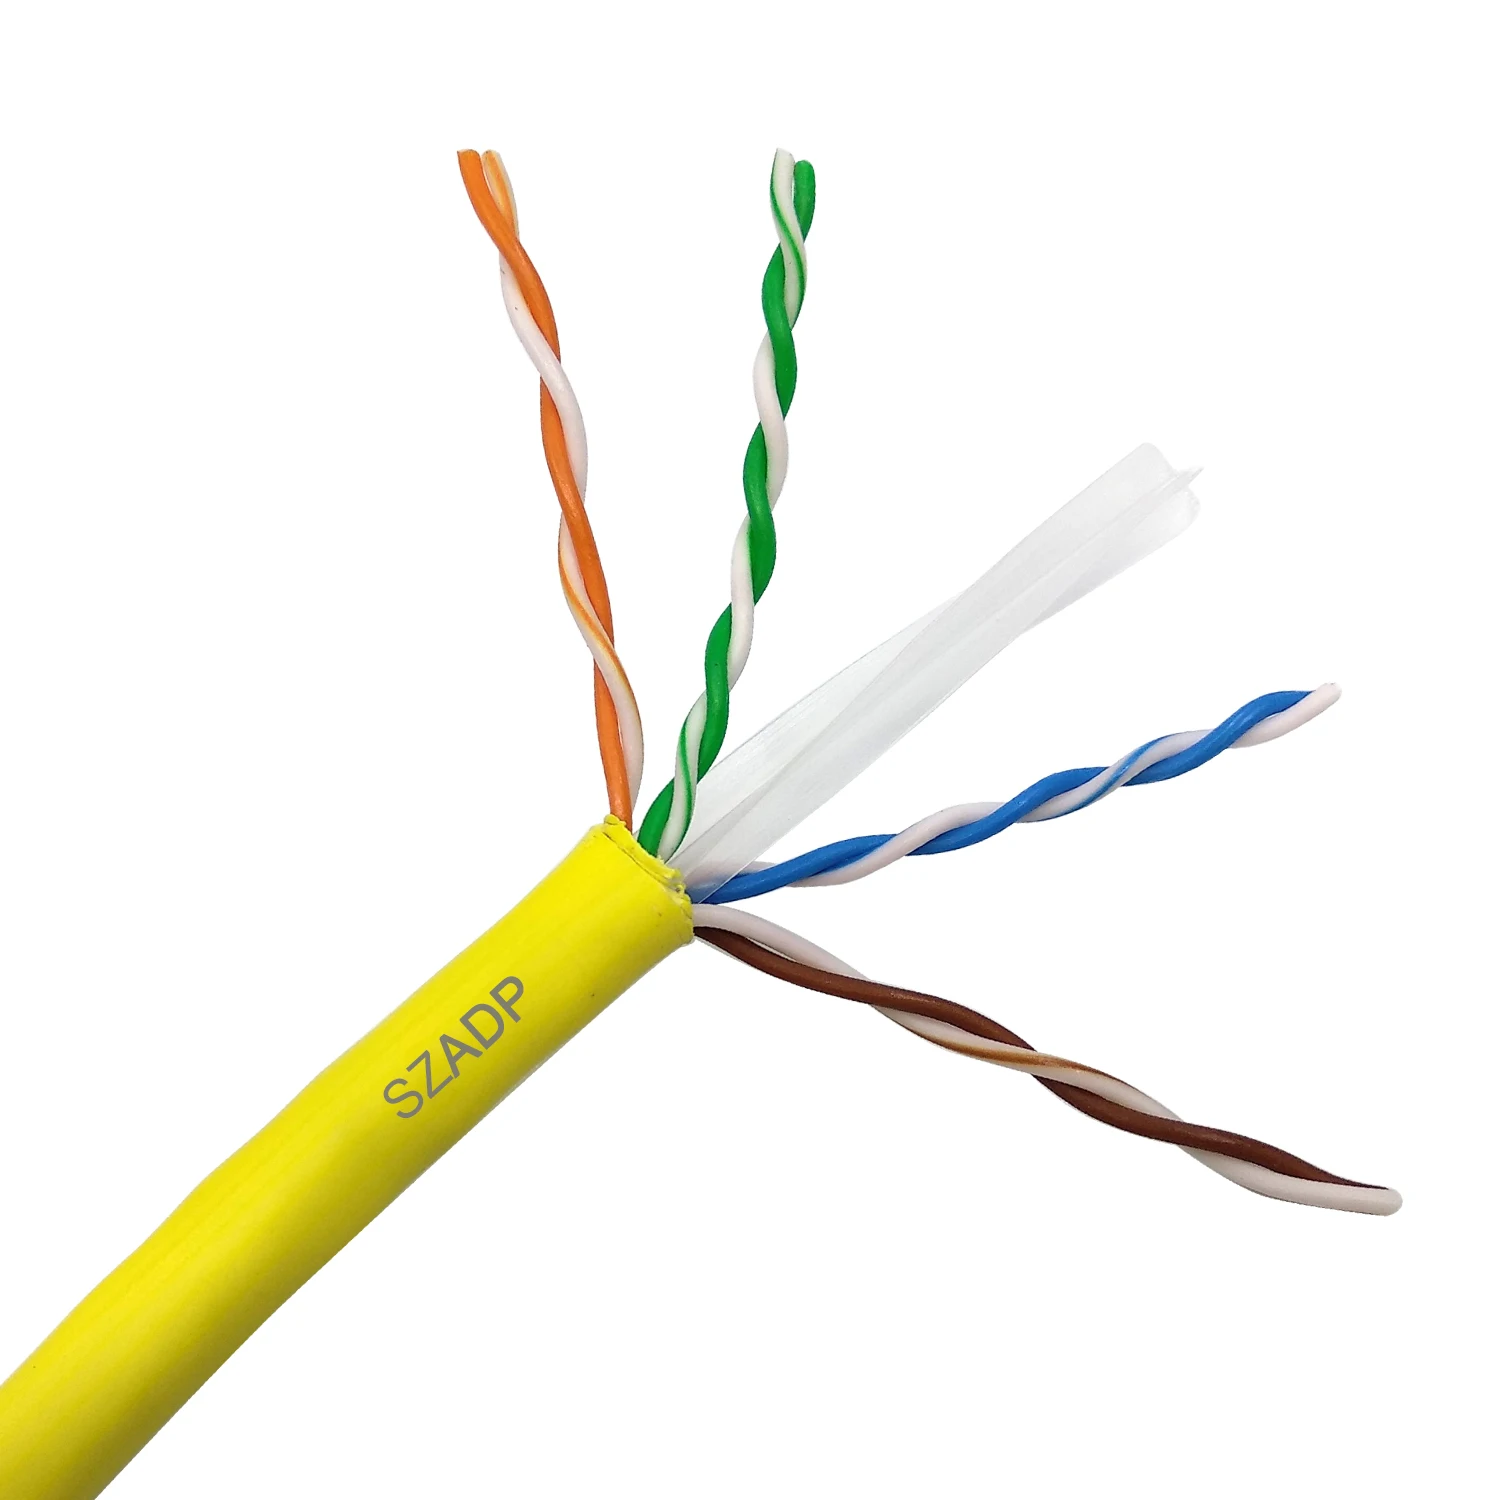 Lounge Verheugen Clancy Utp Cat6 22awg Cable Hcca Conductor Pvc/lszh Jacket Cat6e Cable Lan Cable  305m Unshielded 26 Cat6 Utp Keystone Jack Modular - Buy Cat6e Cat6 Cable  Lan Cable 305m Utp Cat6 305m,High Quality